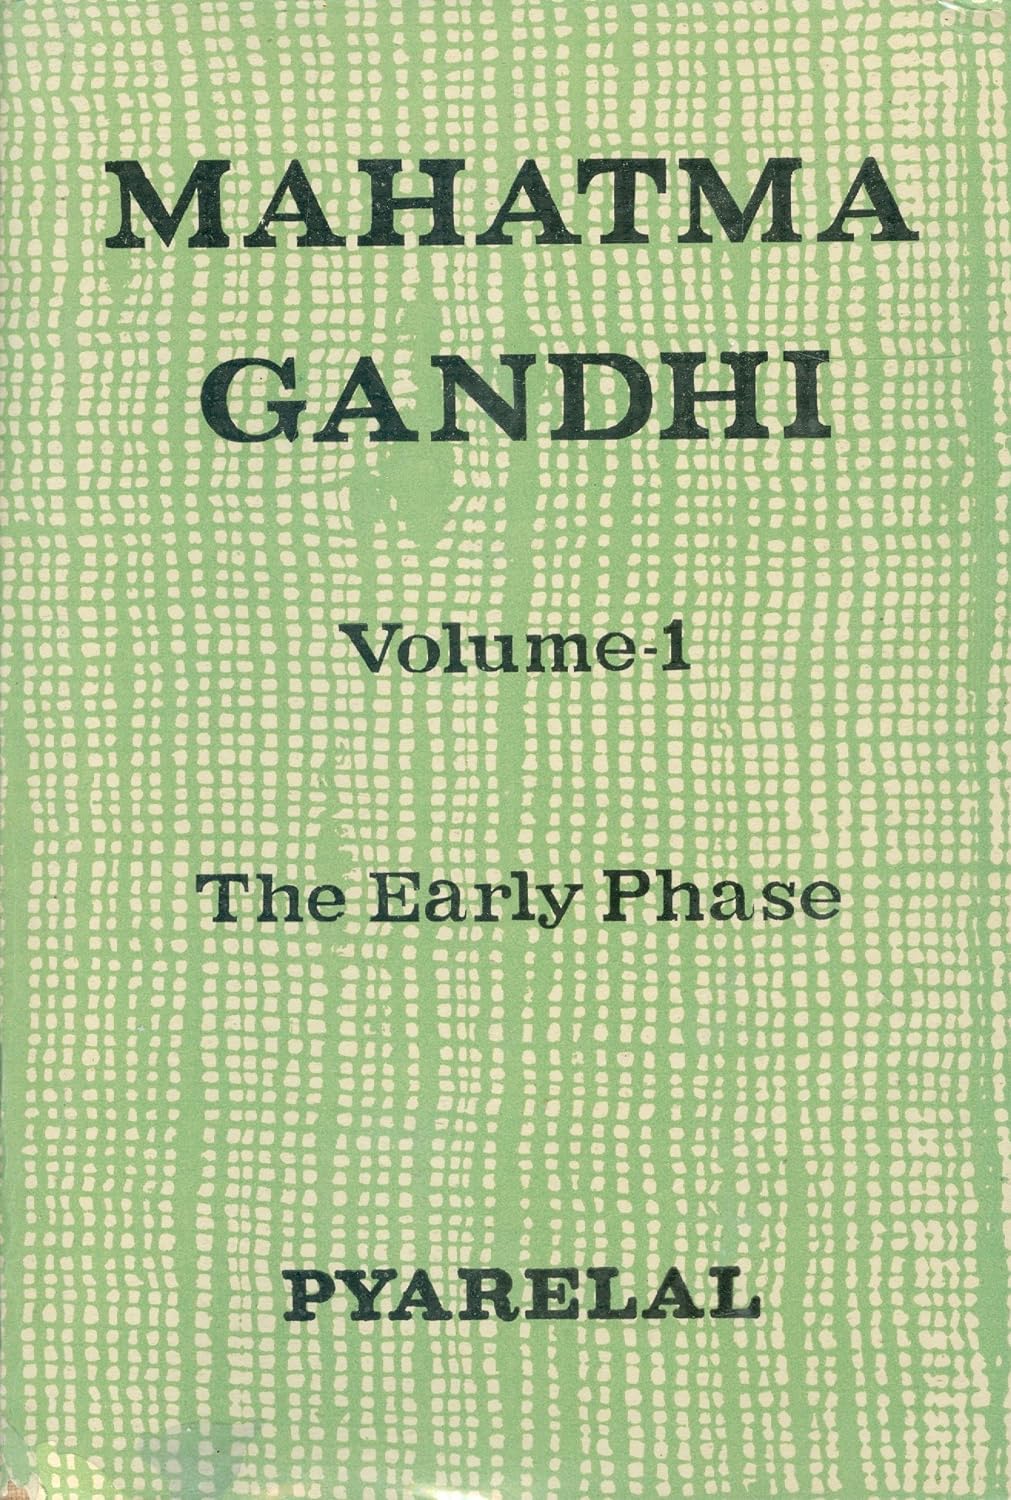 Mahatma Gandhi - The Early Phase - Volume 1 book cover